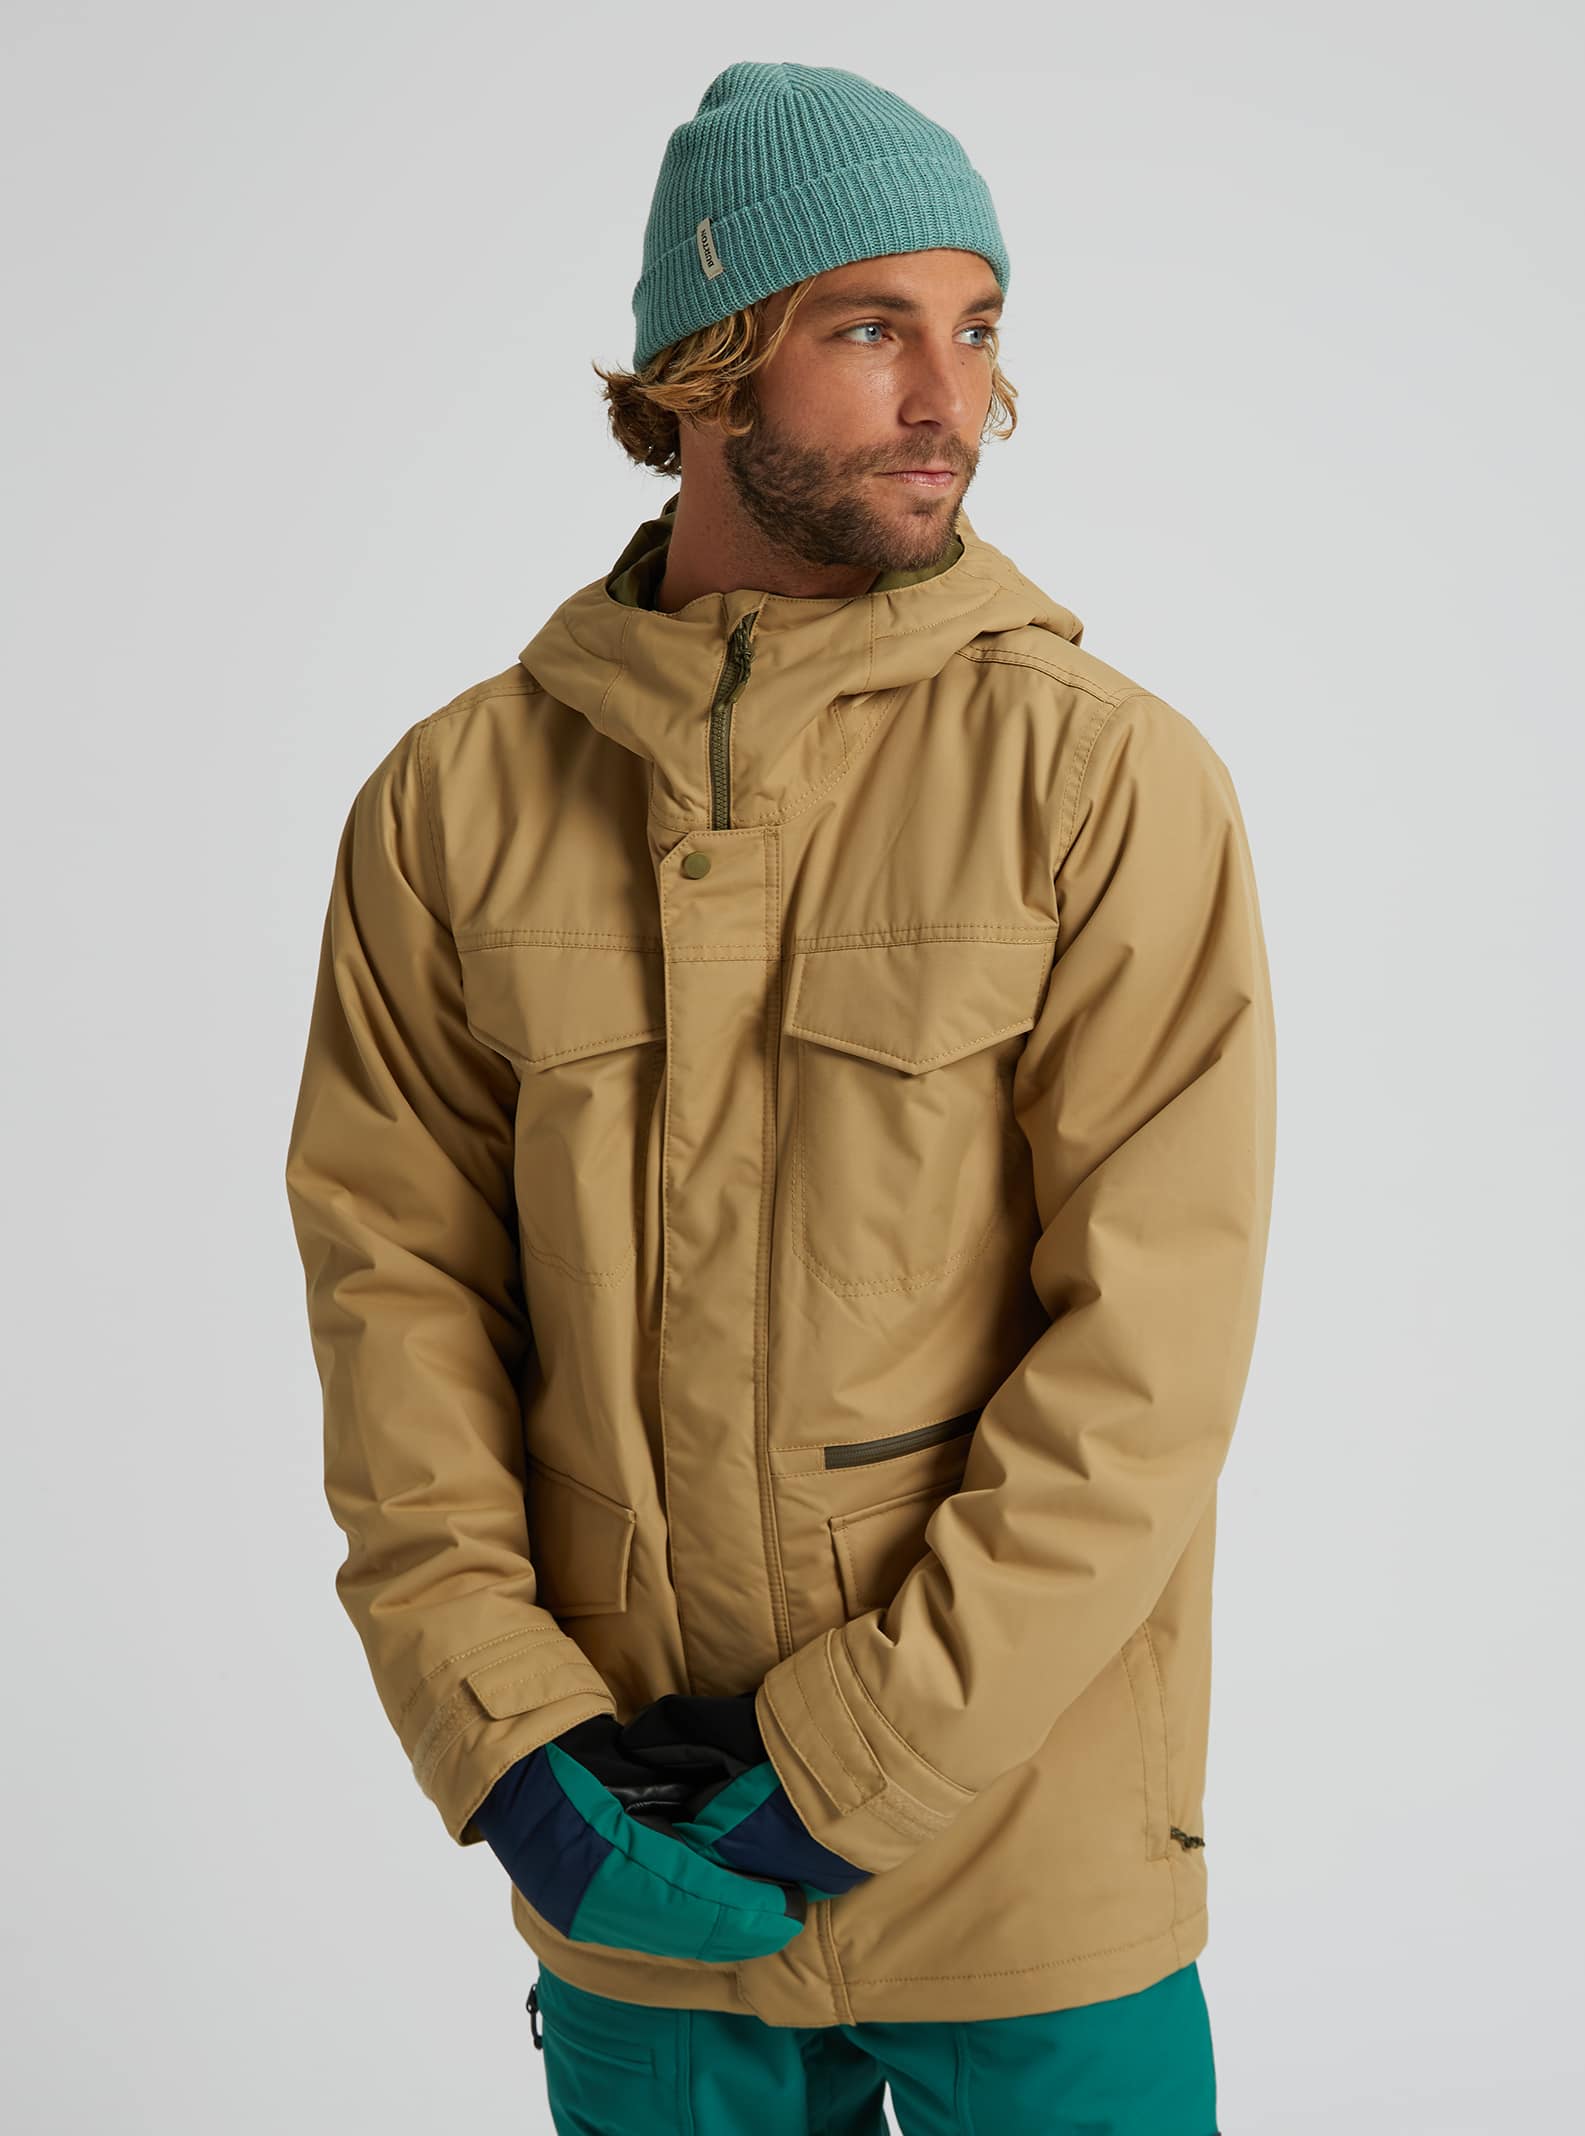 Snowboarding Jackets Mens Cheap / Dope Snow 2021 / Newchic offer ...